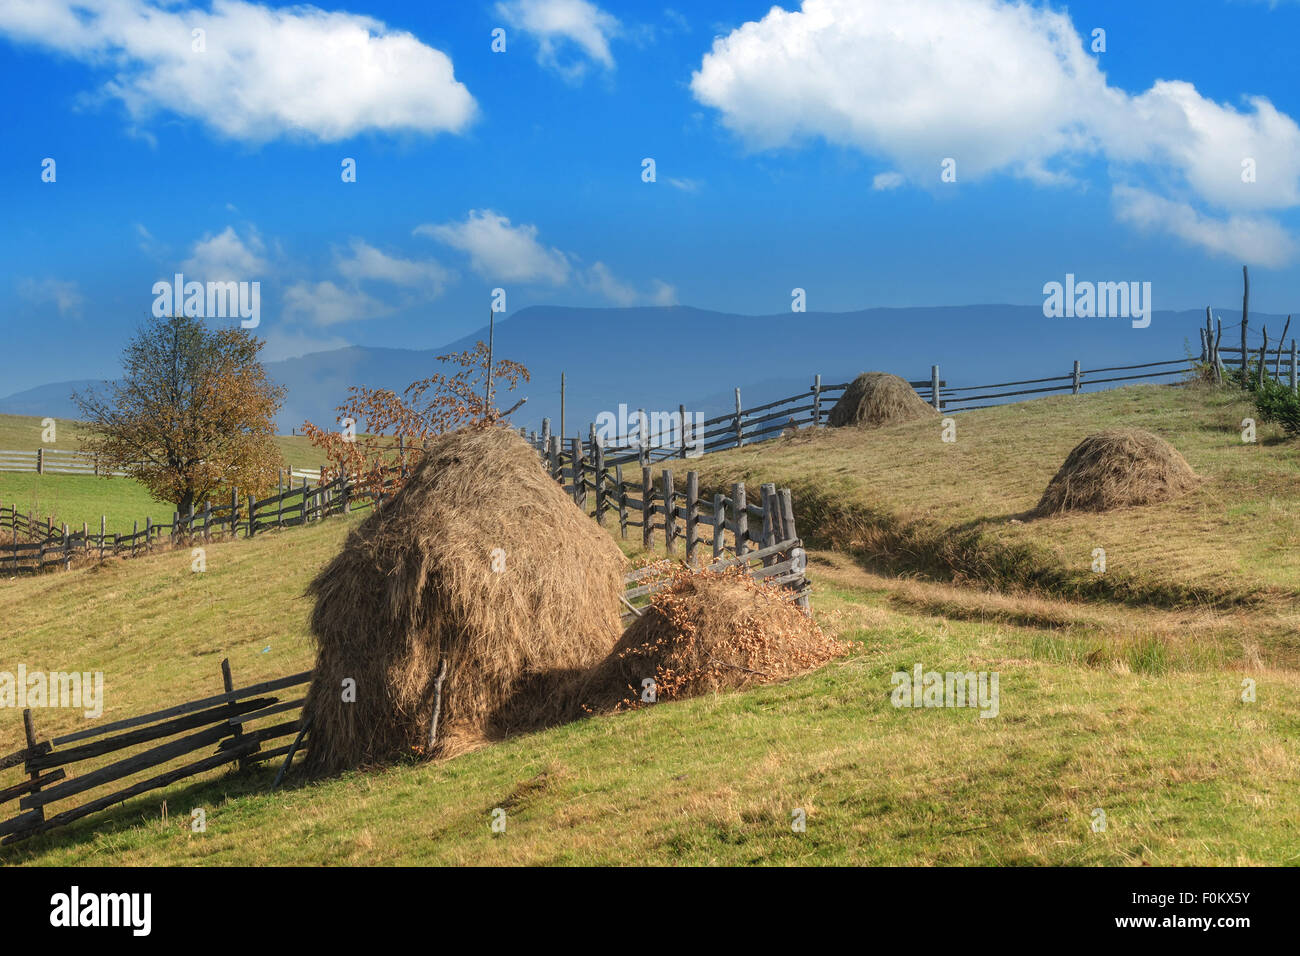 Amazing rural scene on autumn valley. Wooden fence and haystack on a foreground. Carpathians, Ukraine, Europe. Stock Photo